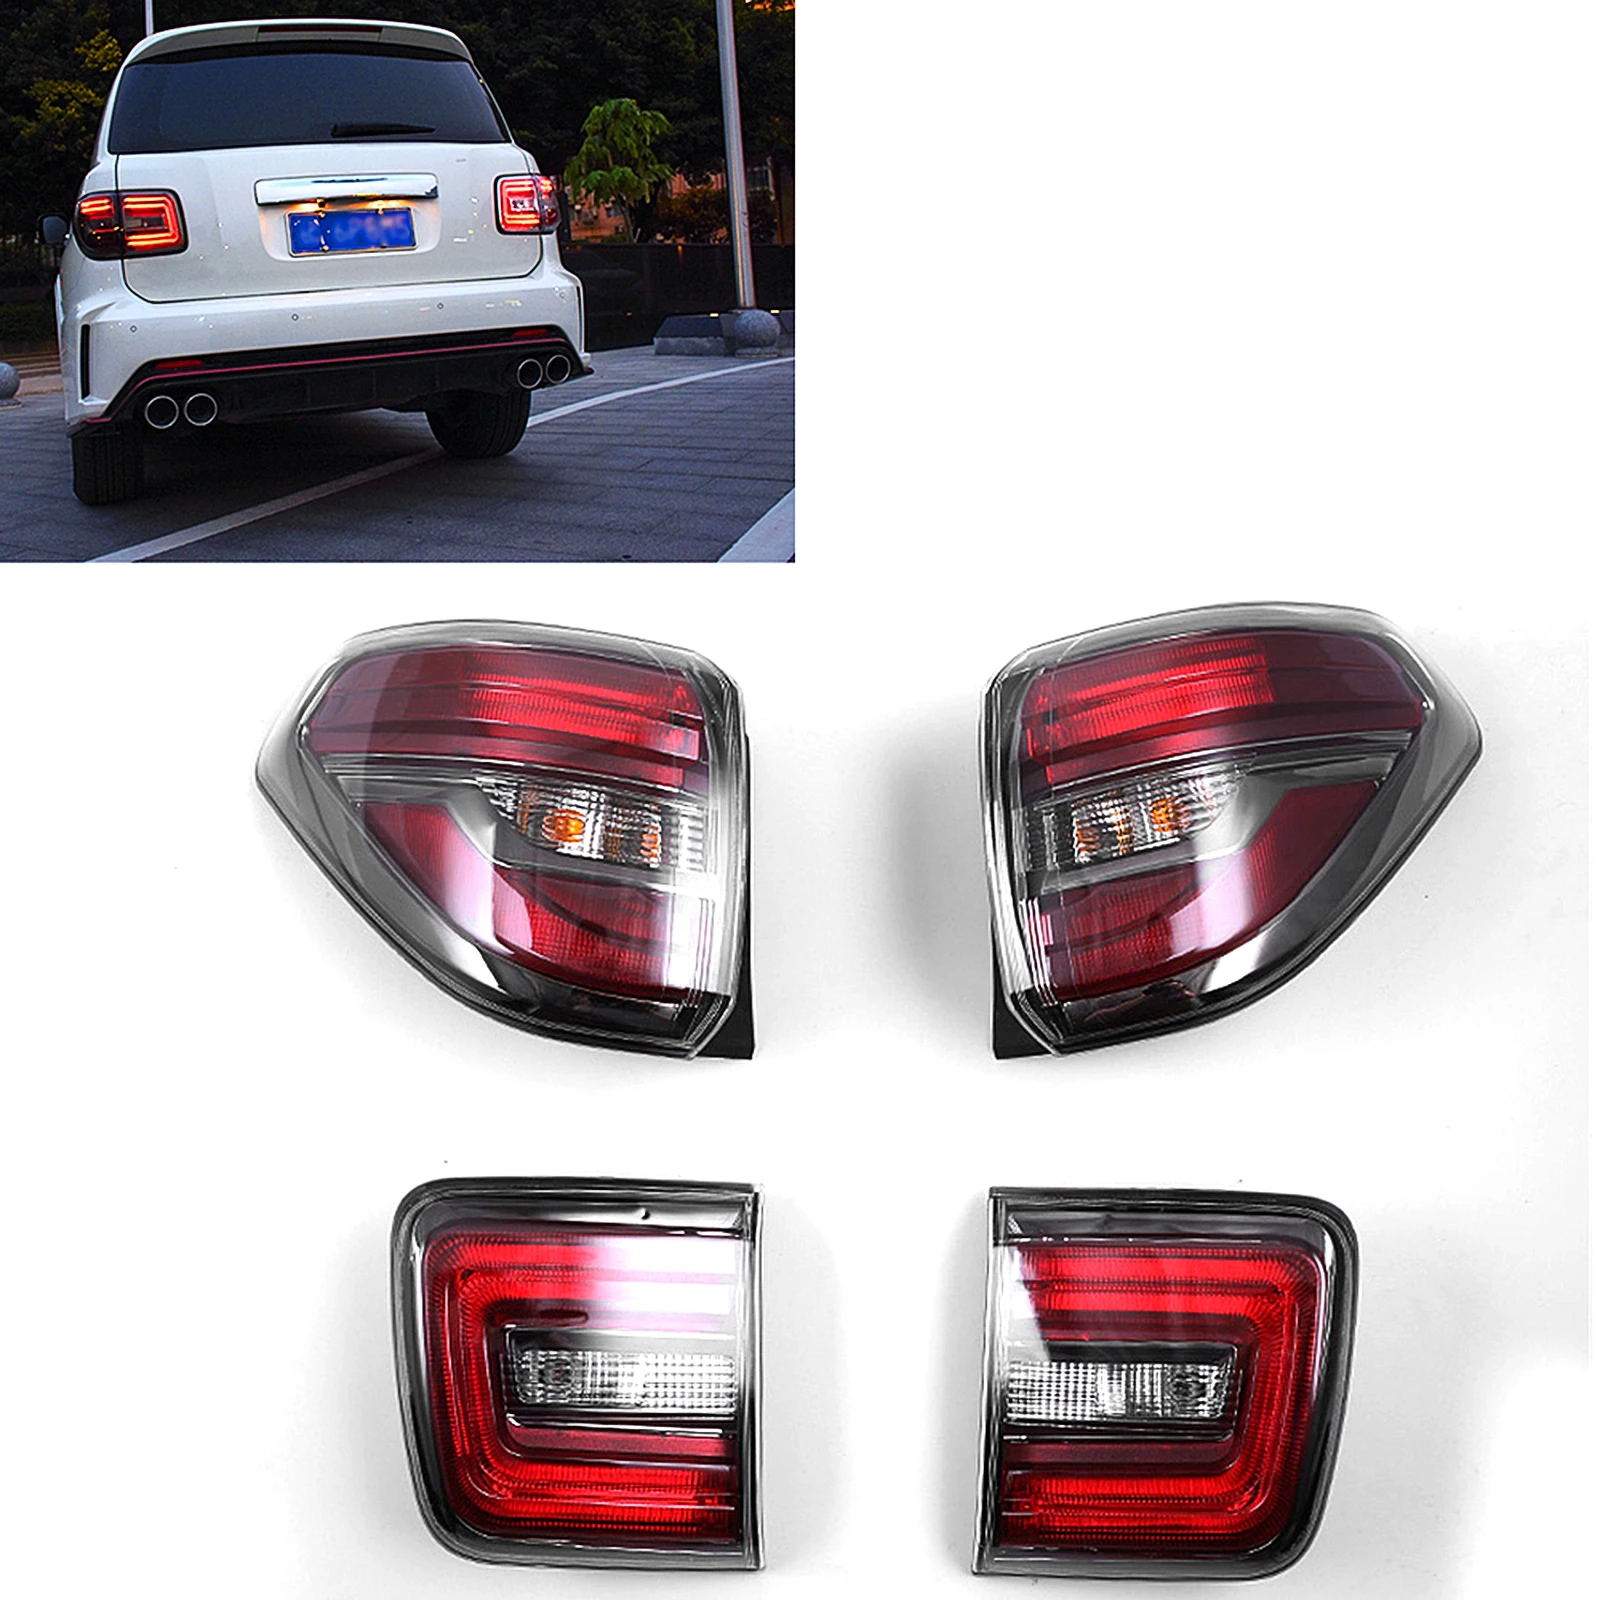 

4PCS Tail Lights Trunk Taillights LED Rear Taillamp Bumper Lamp Signal Bulb For Nissan Patrol Y62 2010-2019